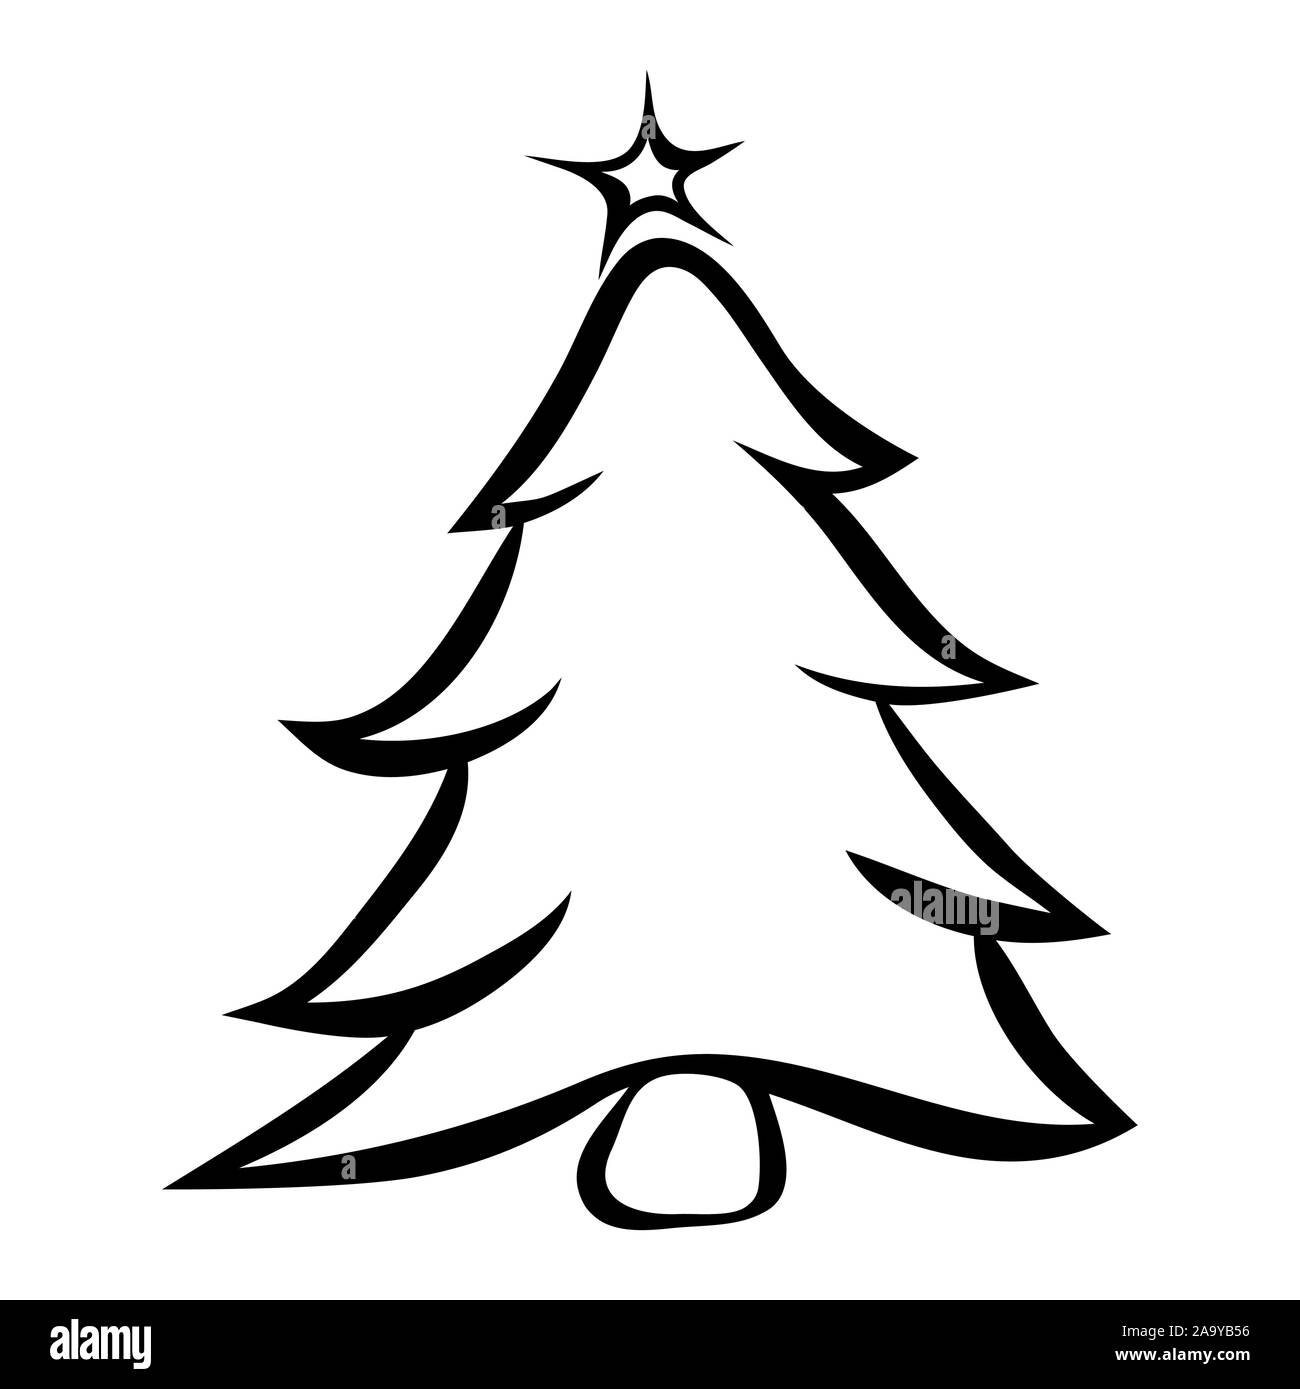 Fir tree for christmas symbol icon thick line art. Outline design of evergreen pine tree isolated on white background Stock Vector